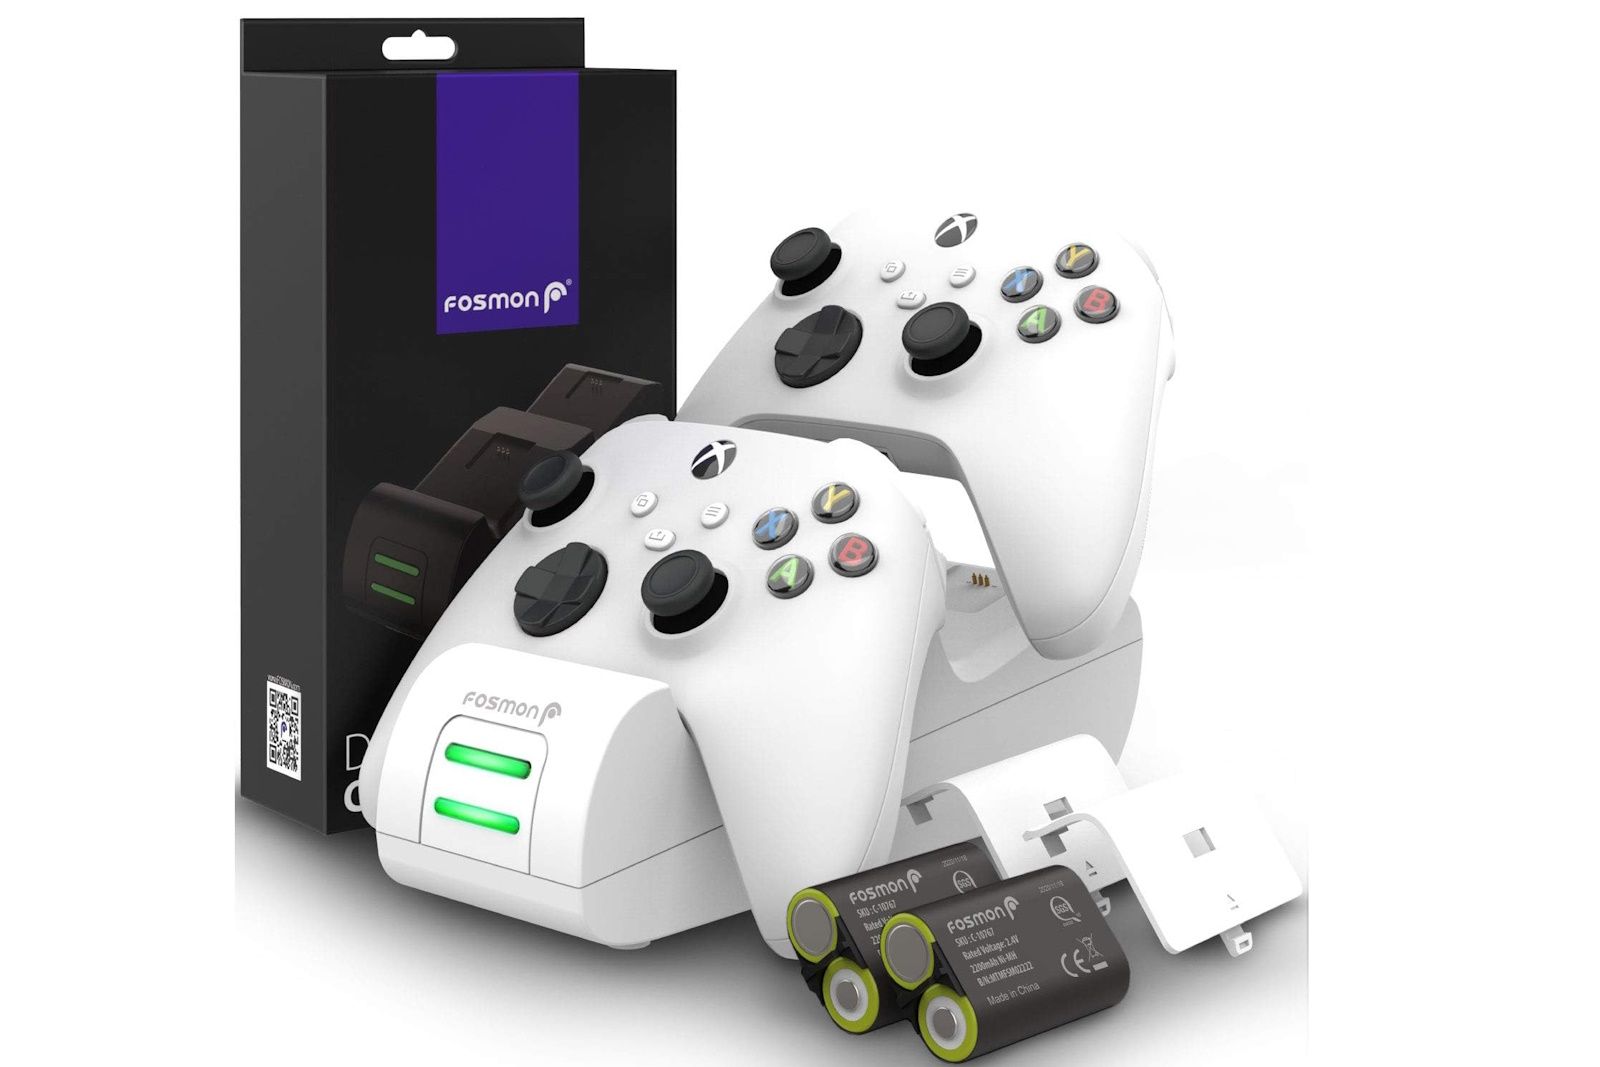 Fosmon Dual 2 Max Docking Station Kit for Xbox One controllers